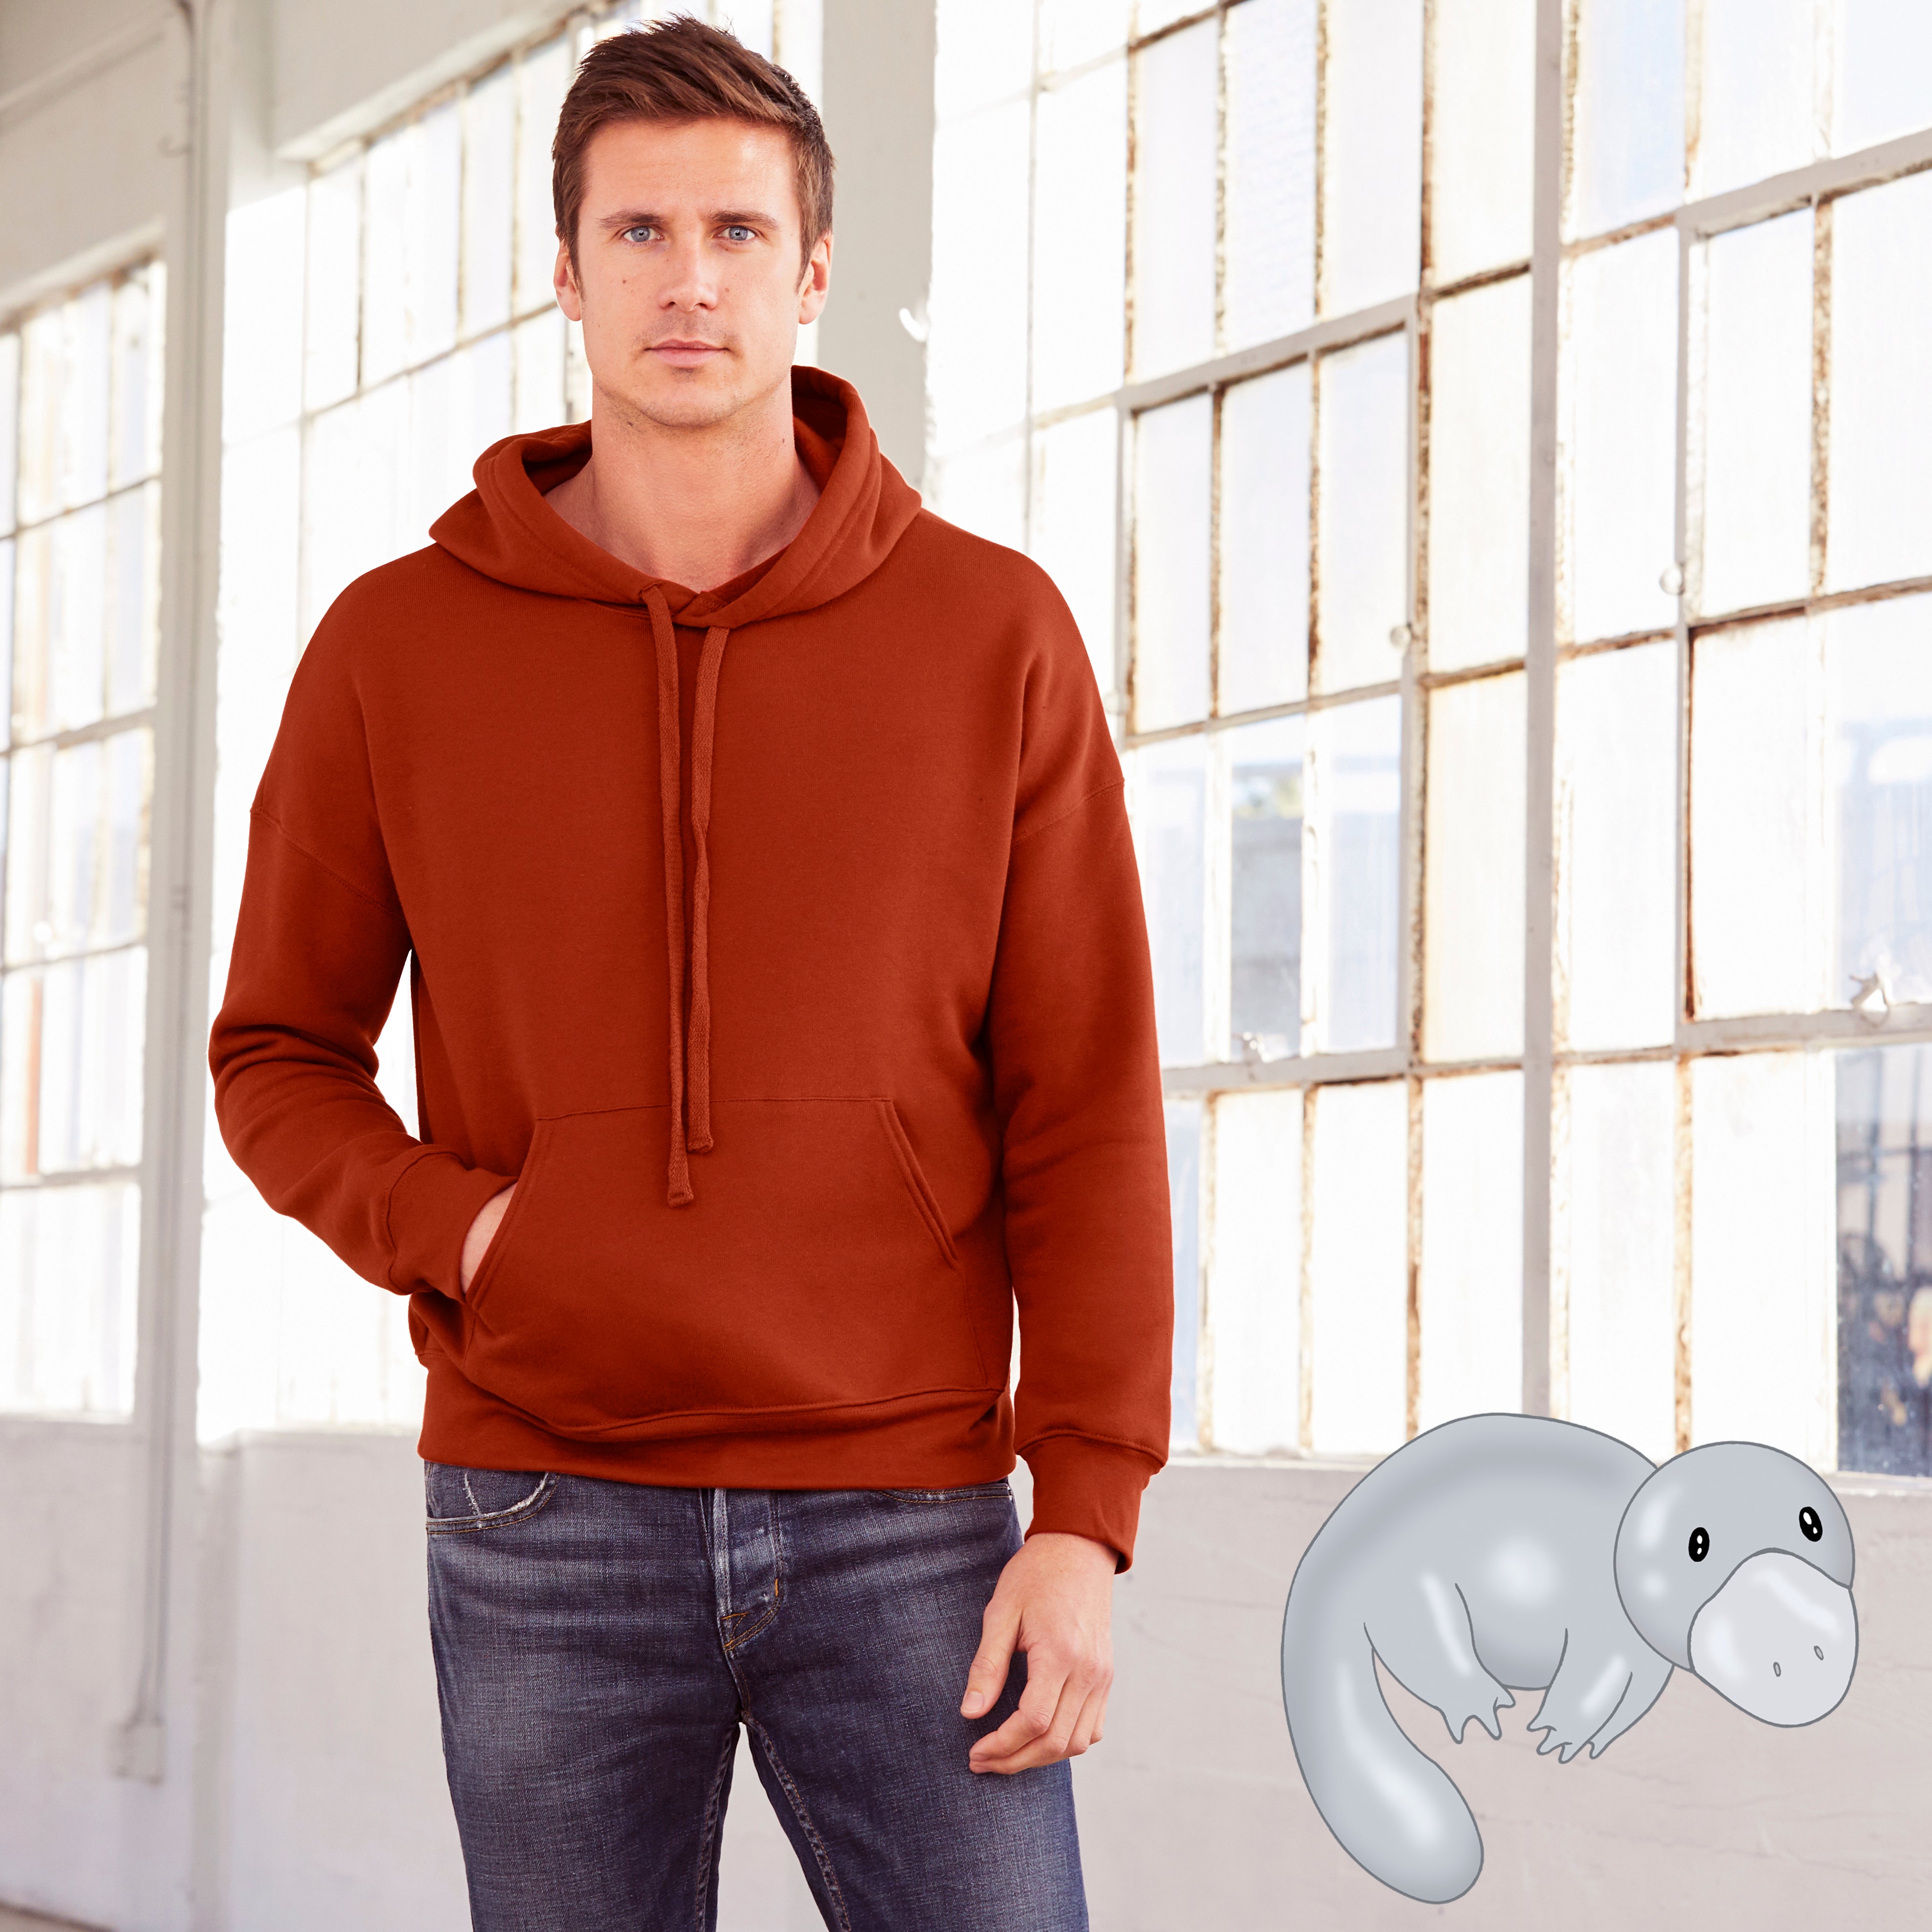 new-product-soft-sweatshirt-cozy-warm-brick-dark-red-rust-color-sunset-orange-burnt-crimson-hoodie-face-mask-Plats-Hoodie-facemask-all-in-one-convertible-plats-hoodie-platinum-platypus-guy-millennial-boy-man-beautiful-eyes-blue-green-young-cute